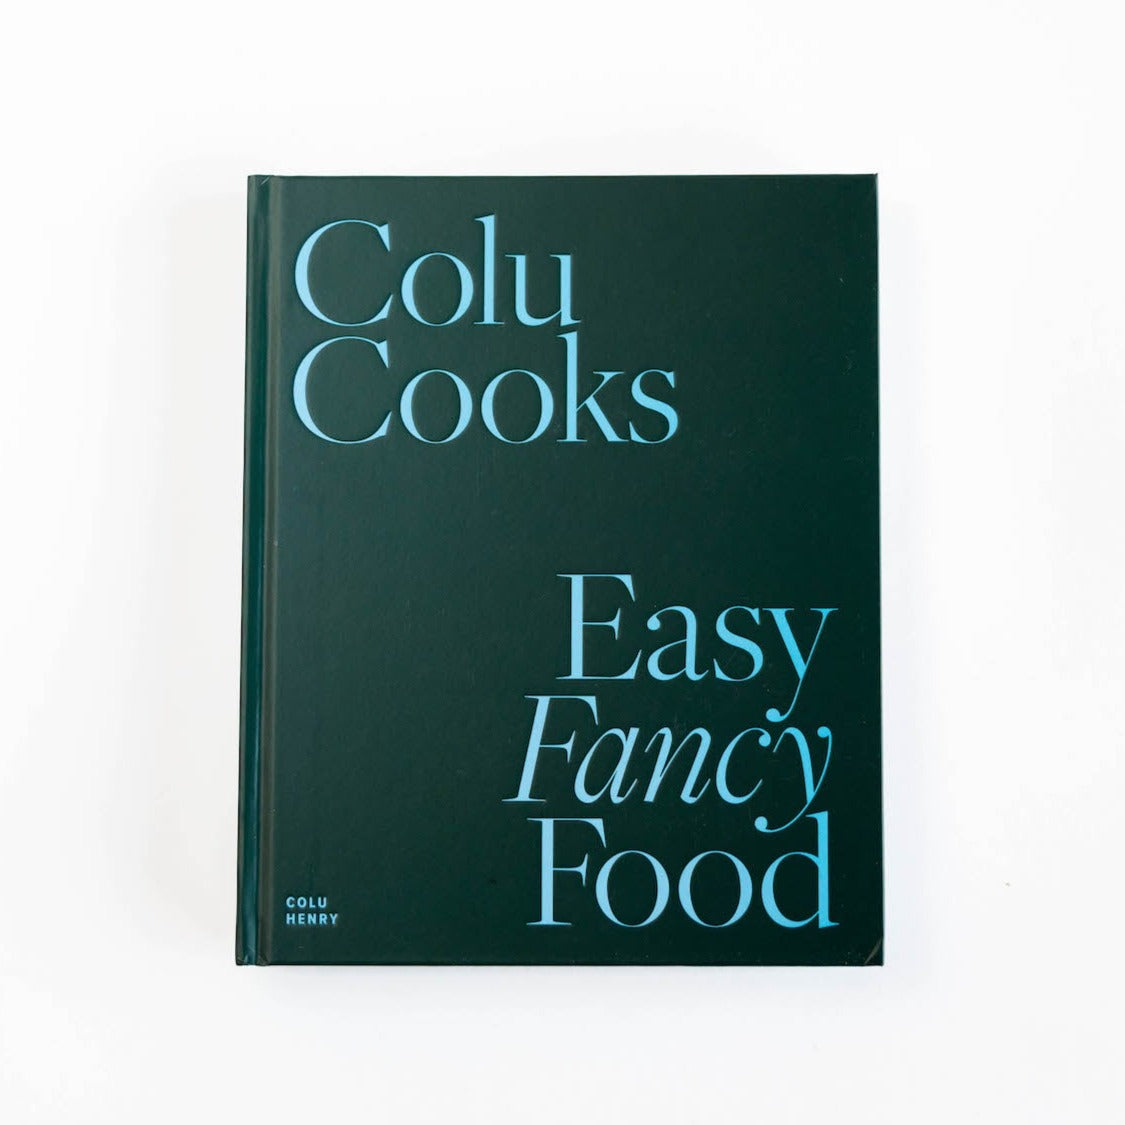 Dark green cover of Easy Fancy Food with light blue text.